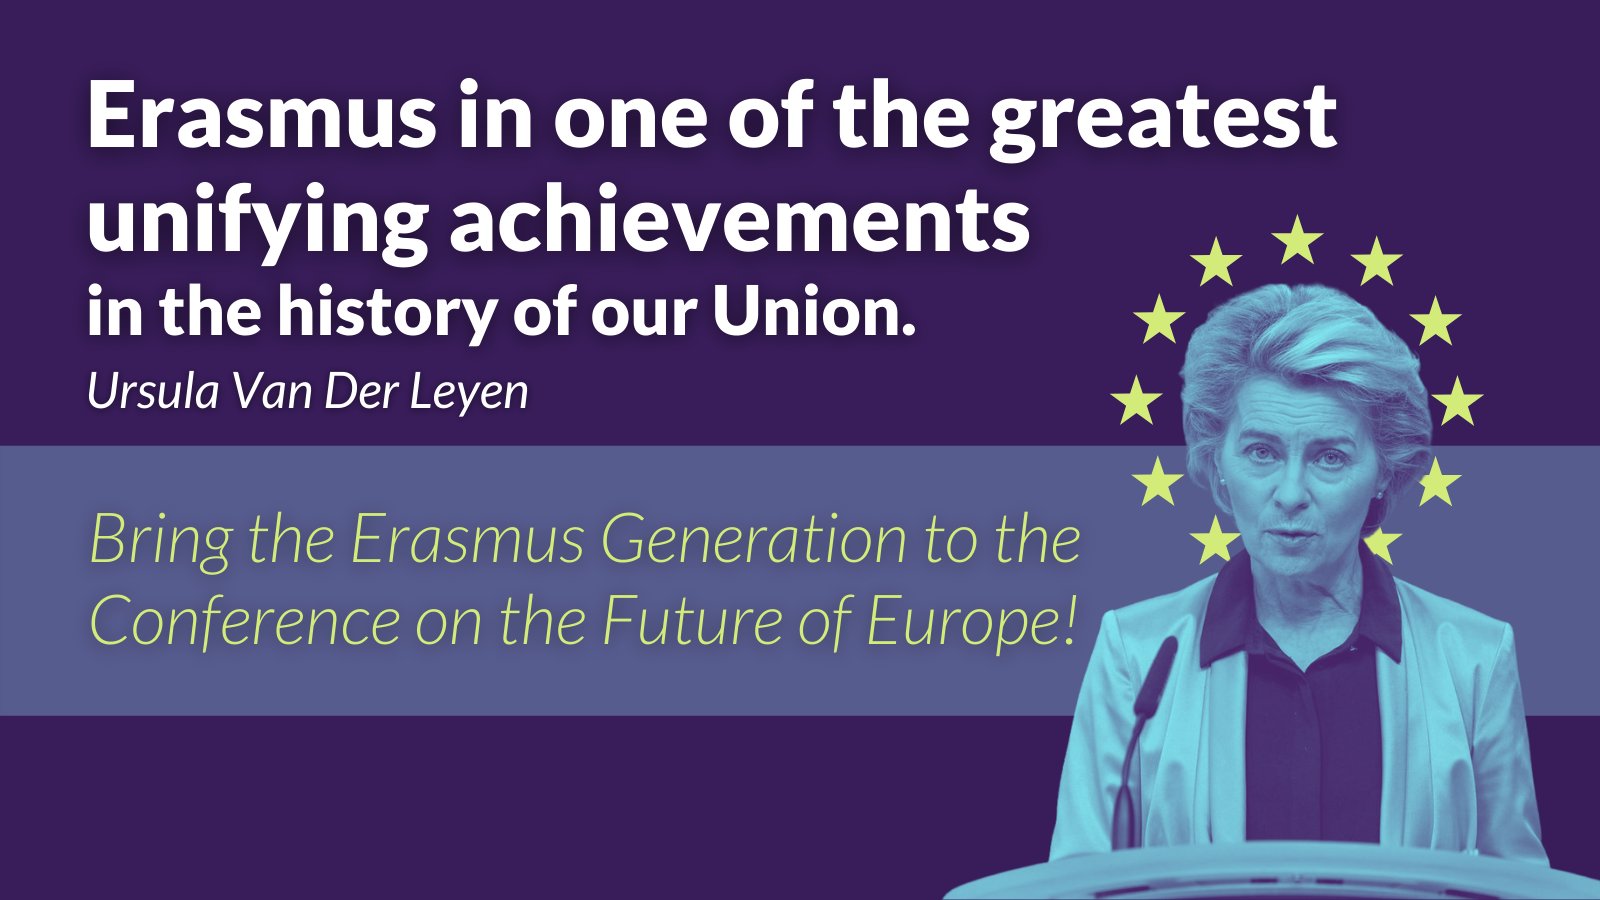 ESN International on Twitter: "If #ErasmusGeneration is the biggest achievement of the Union, why are we not giving them a voice in the #CoFoE? 📣 wants the #Erasmus to share